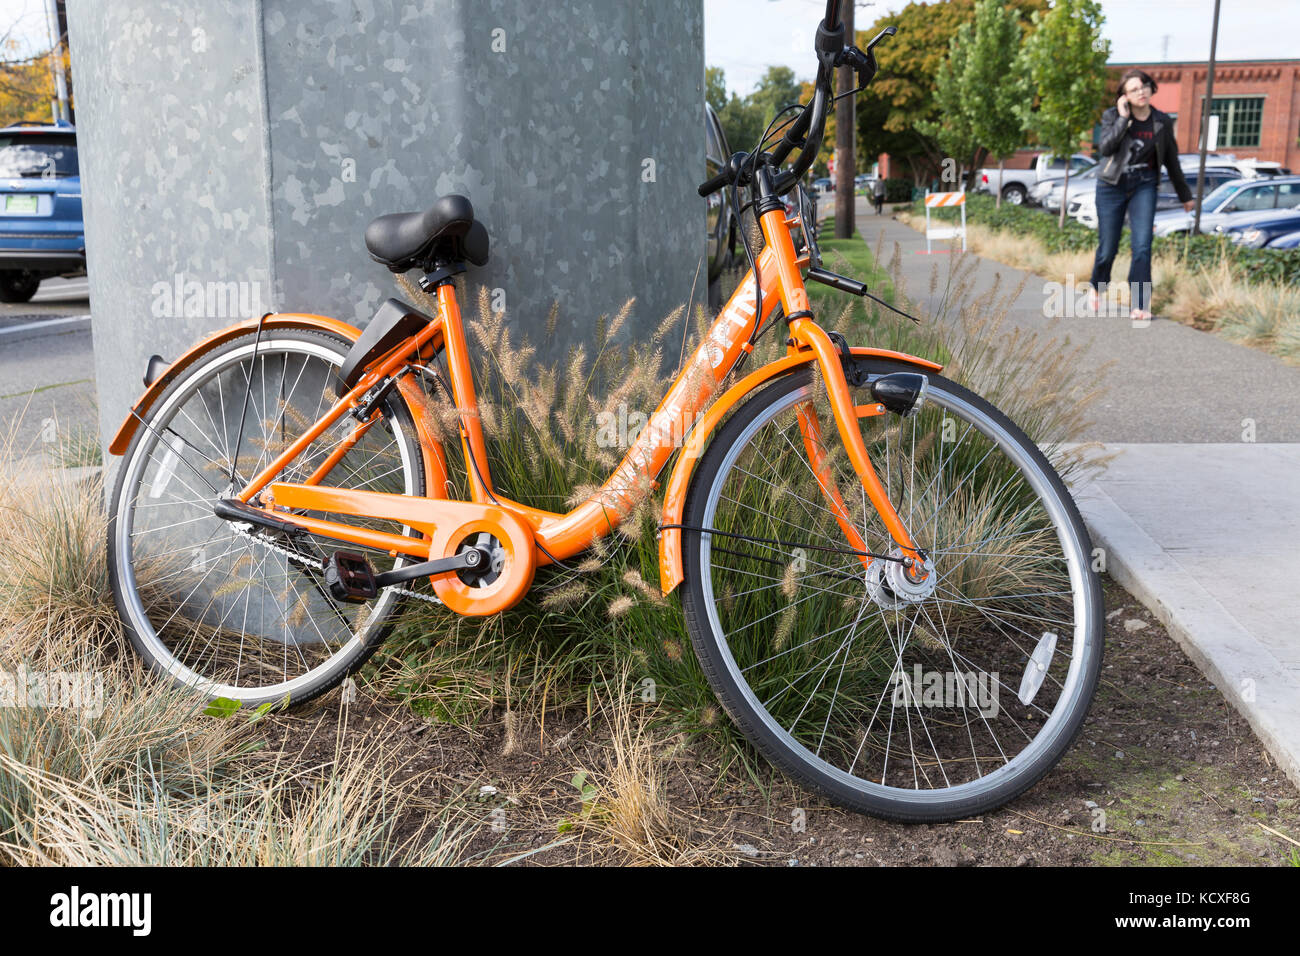 Seattle, Washington: Spin bike parked in the Fremont neighborhood. Three bicycle-sharing companies launched in Seattle this summer after the closing o Stock Photo